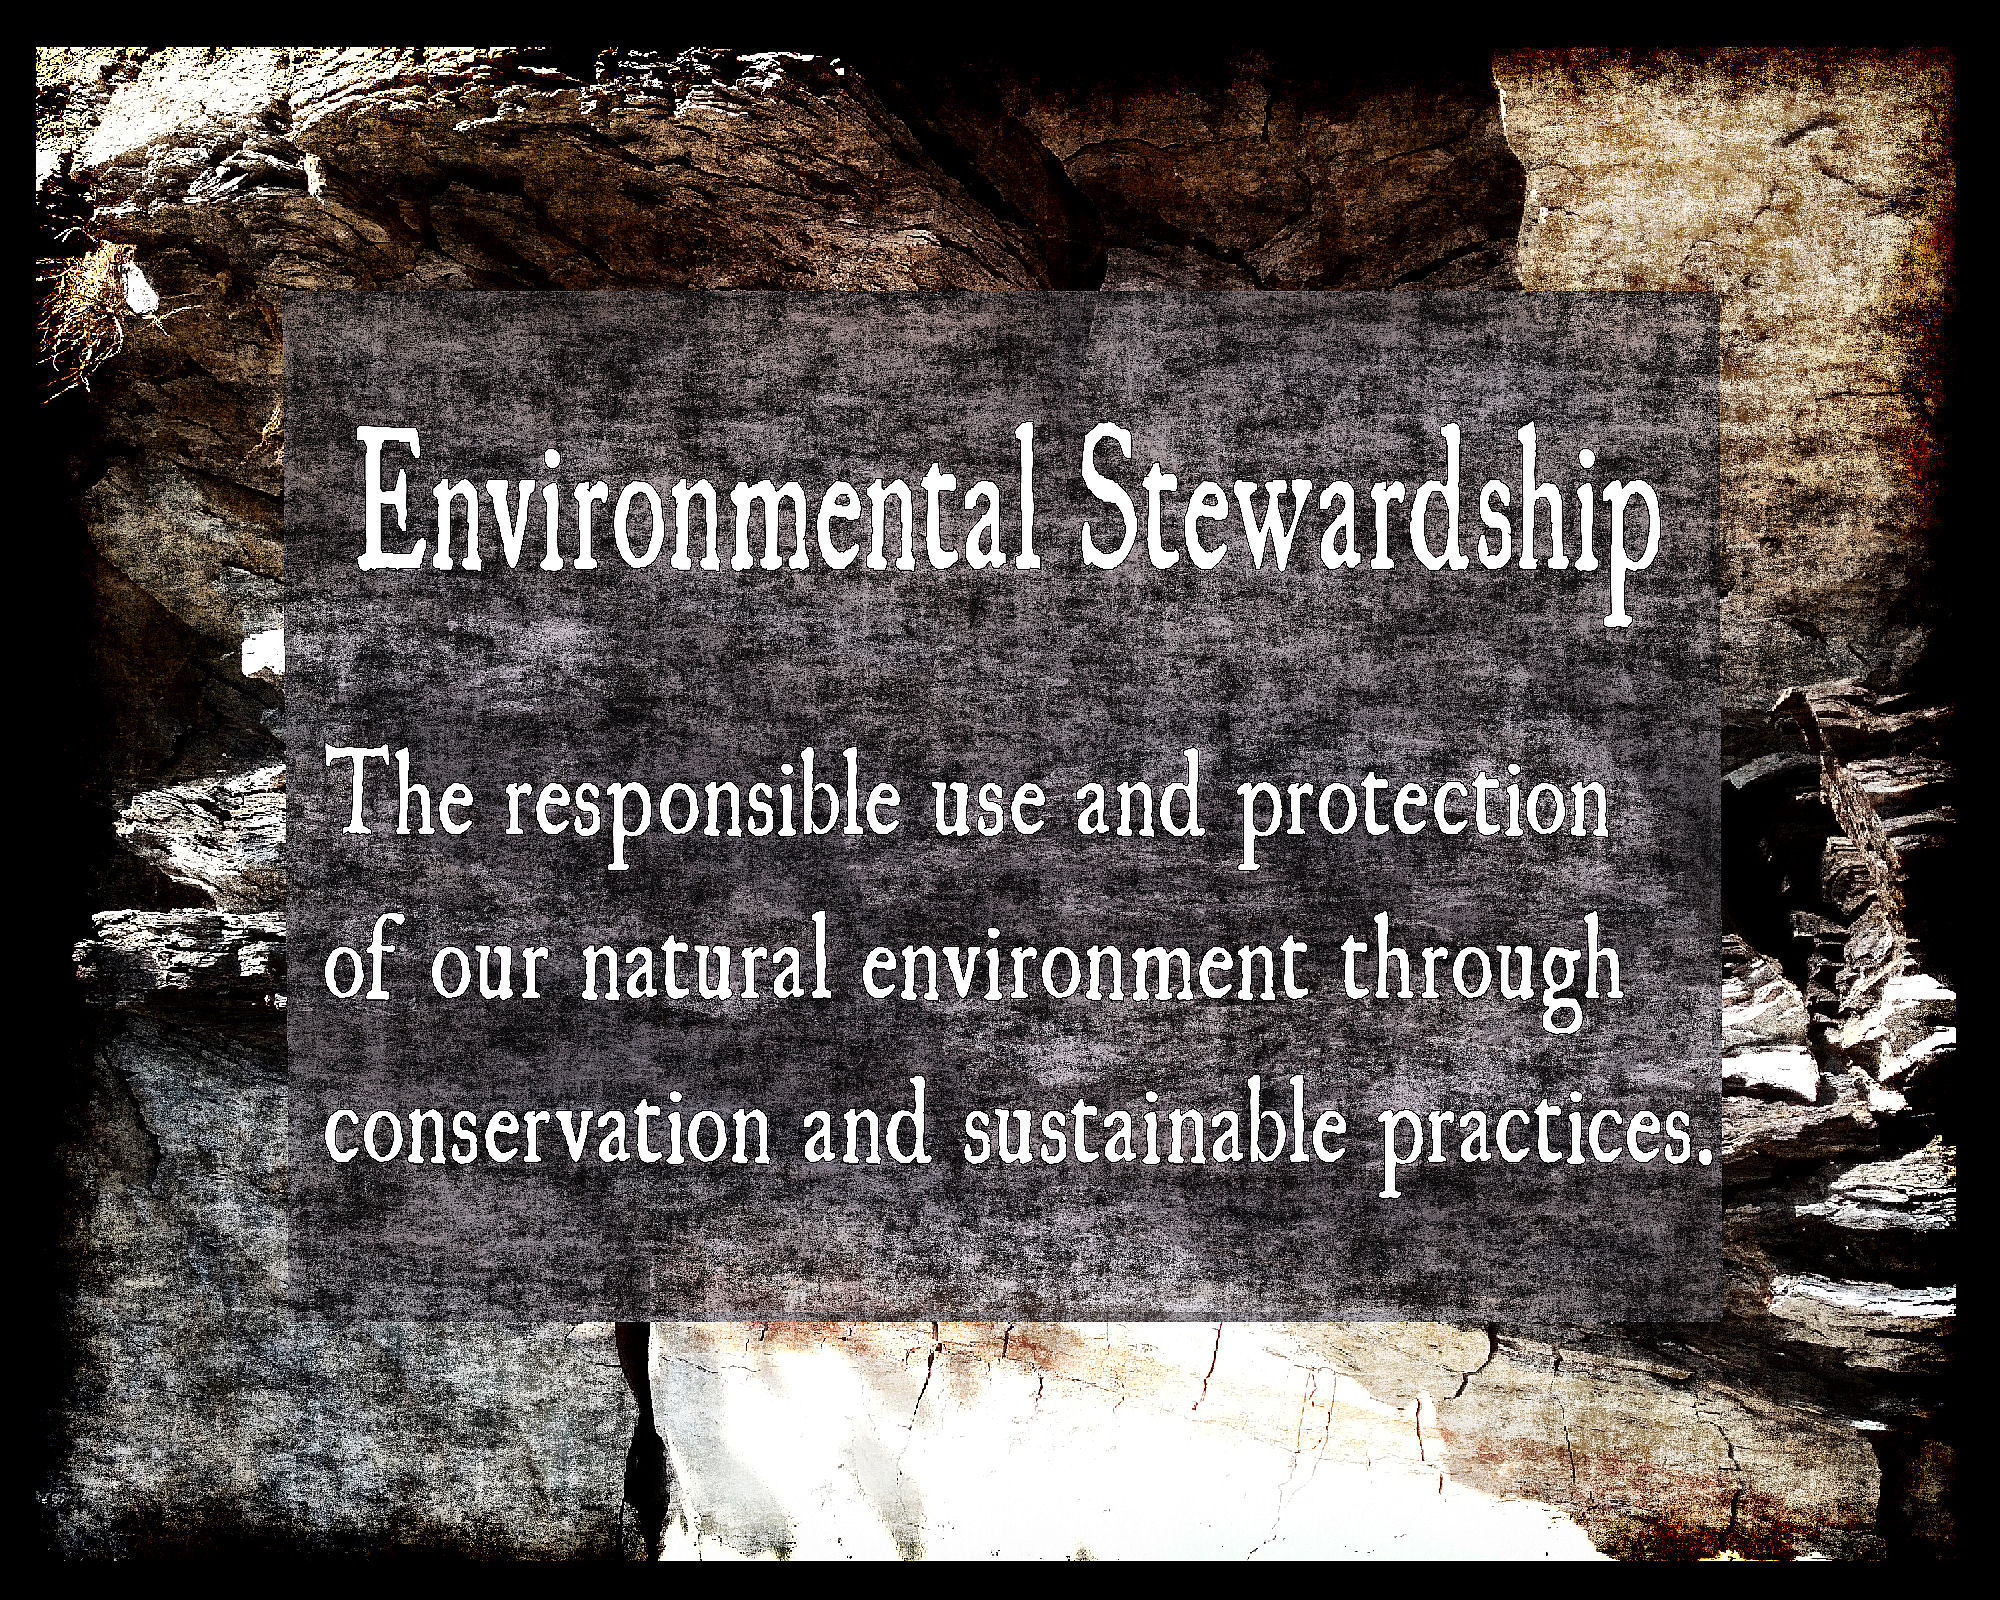 ENVIRONMENTAL STEWARDSHIP is the responsible use and protection of our natural environment through conservation and sustainable practices.